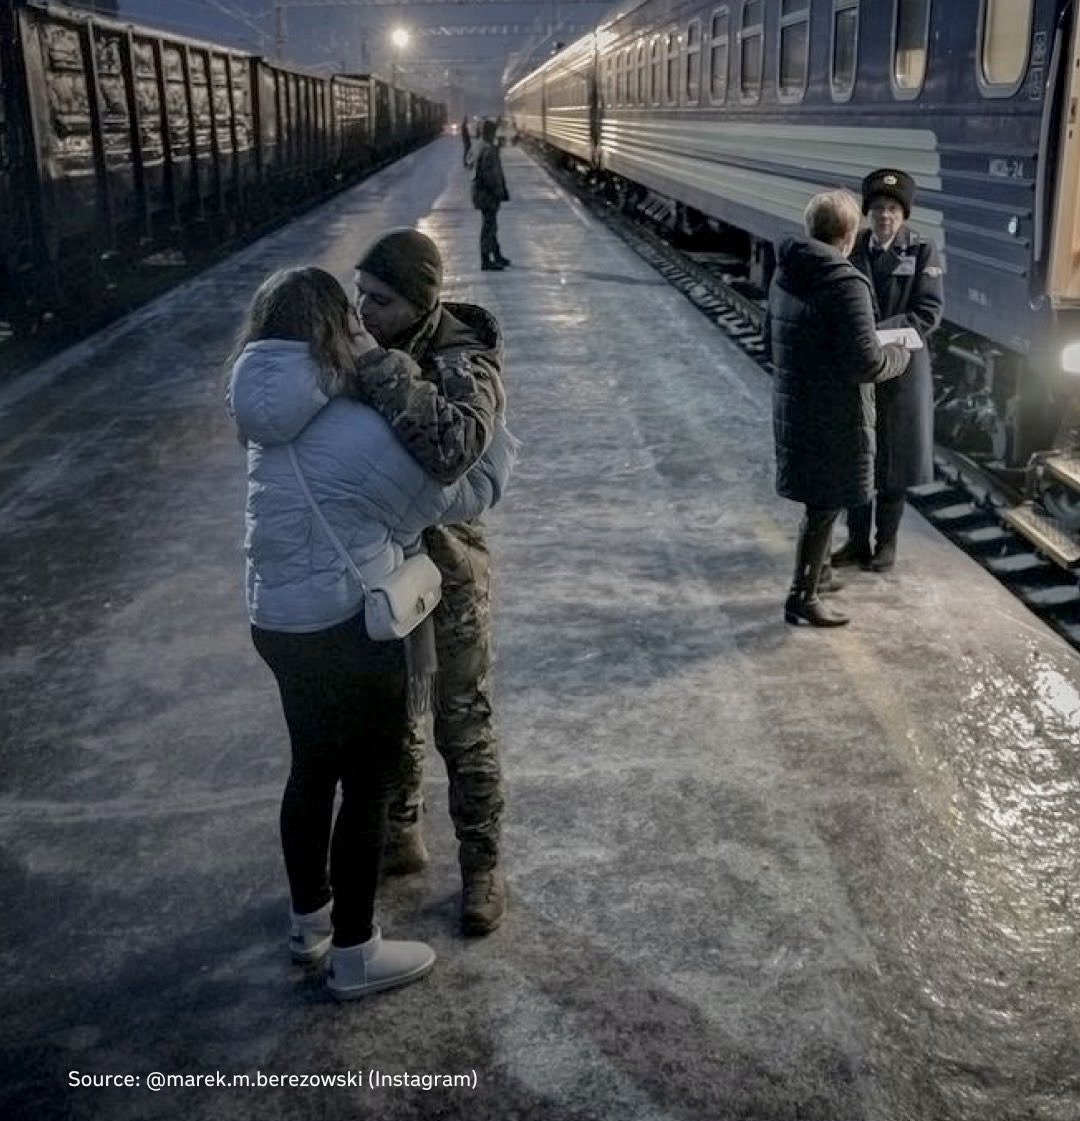 A couple embrace at a provincial railway station. Wartime Ukraine, winter 2023